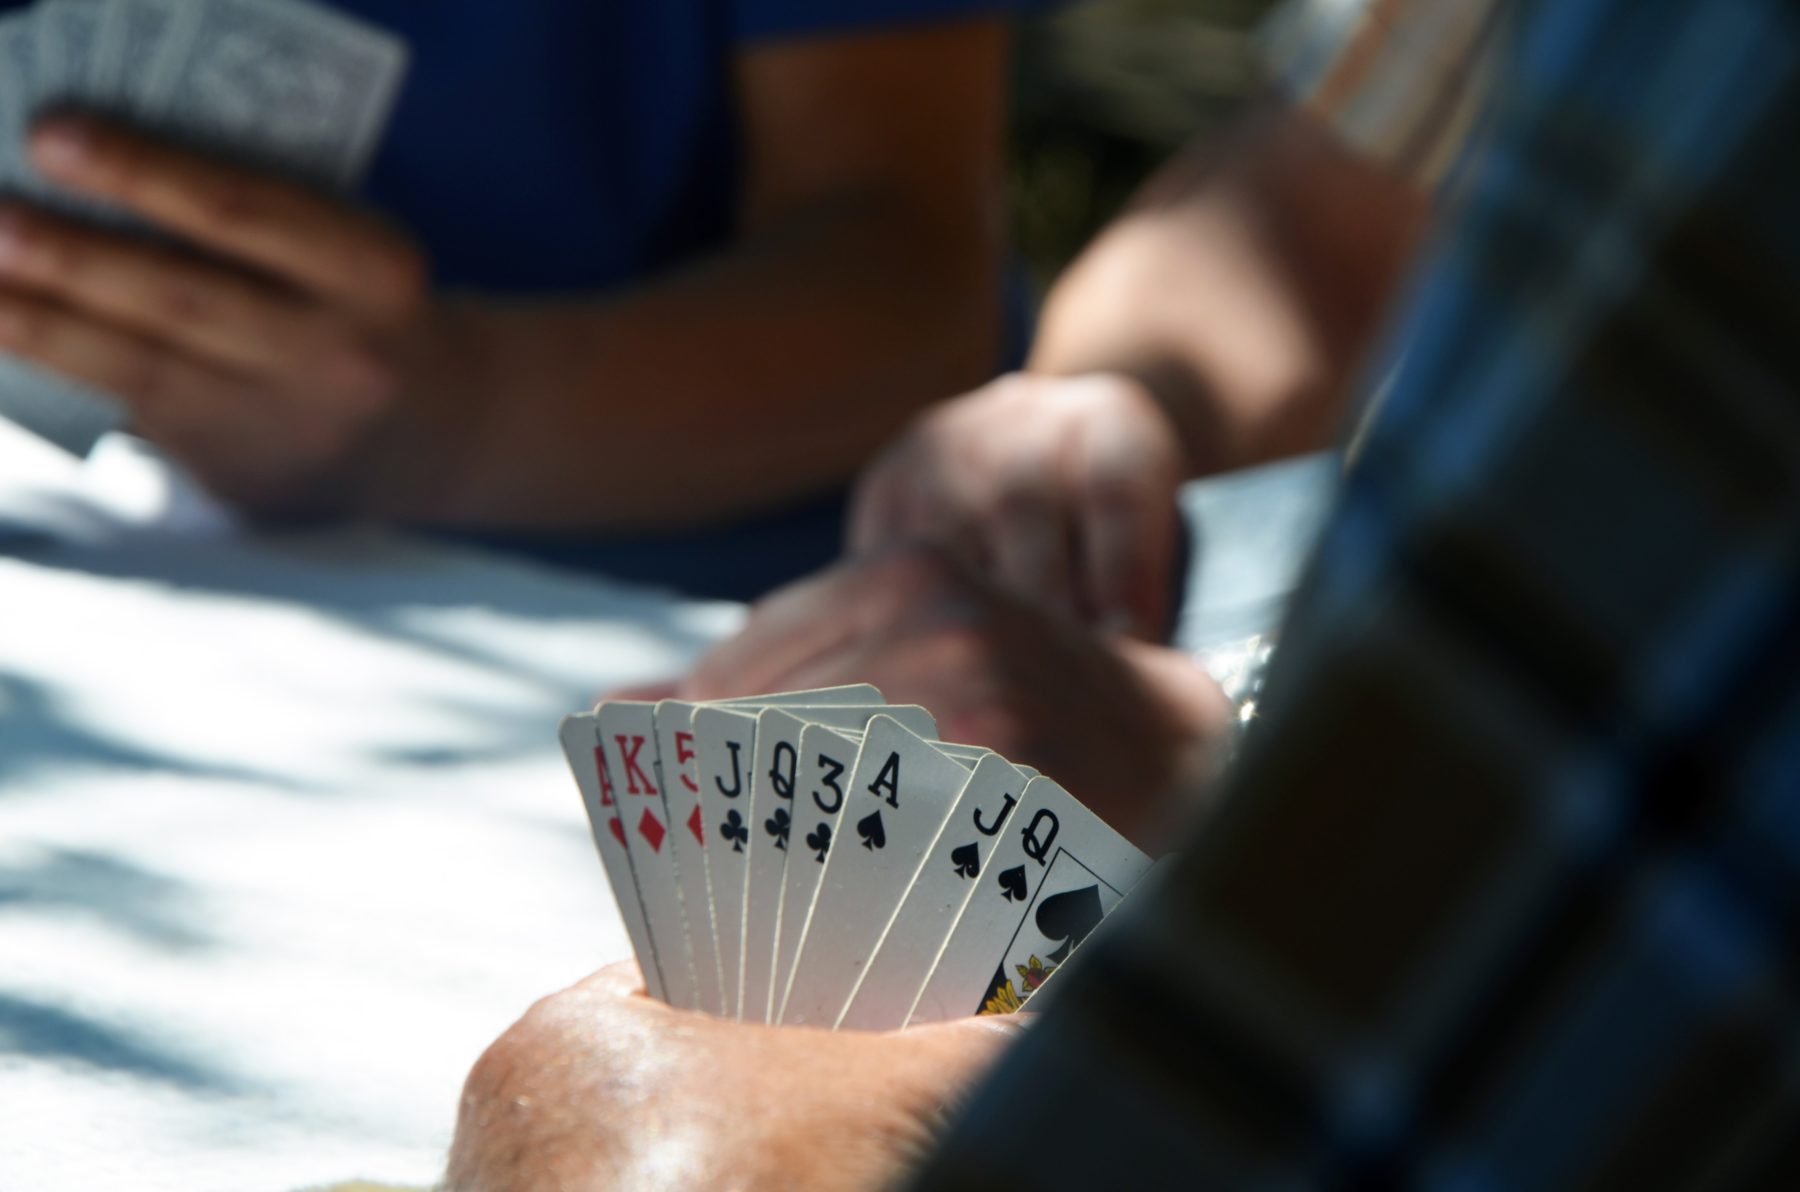 A close up of a person's hand while playing cards at a table with other people.